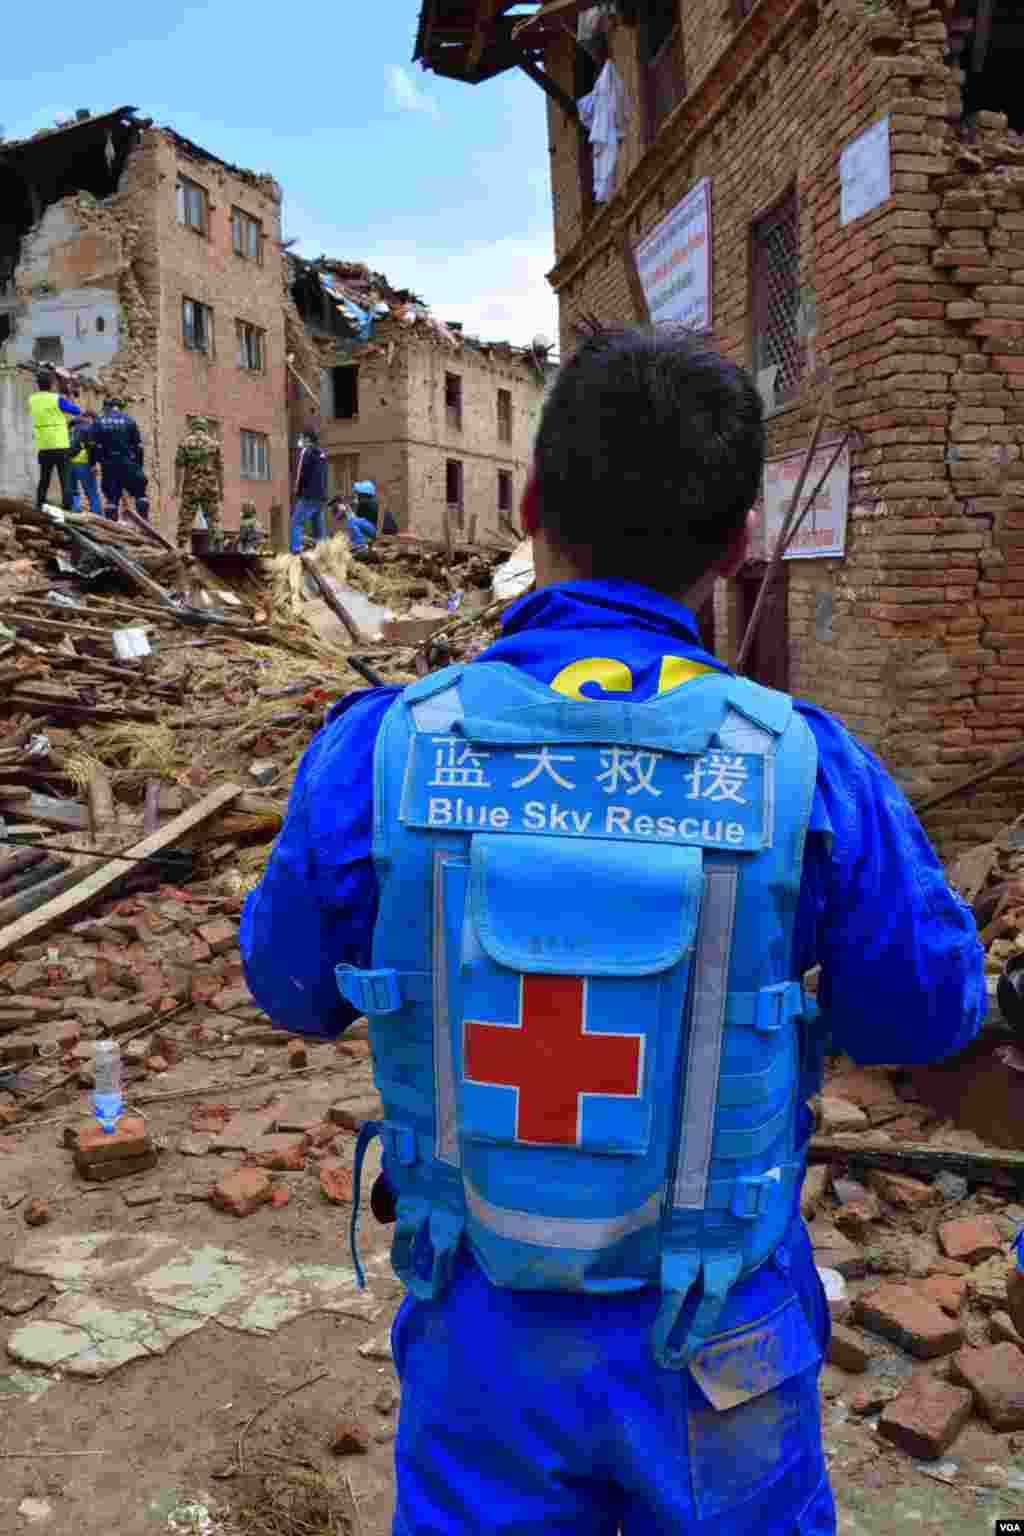 A private team of 60 volunteers from a Chinese NGO is among the foreign teams involved in search and rescue operations in the community, Sankhu, Nepal, April 29, 2015. (Rosyla Kalden/VOA))